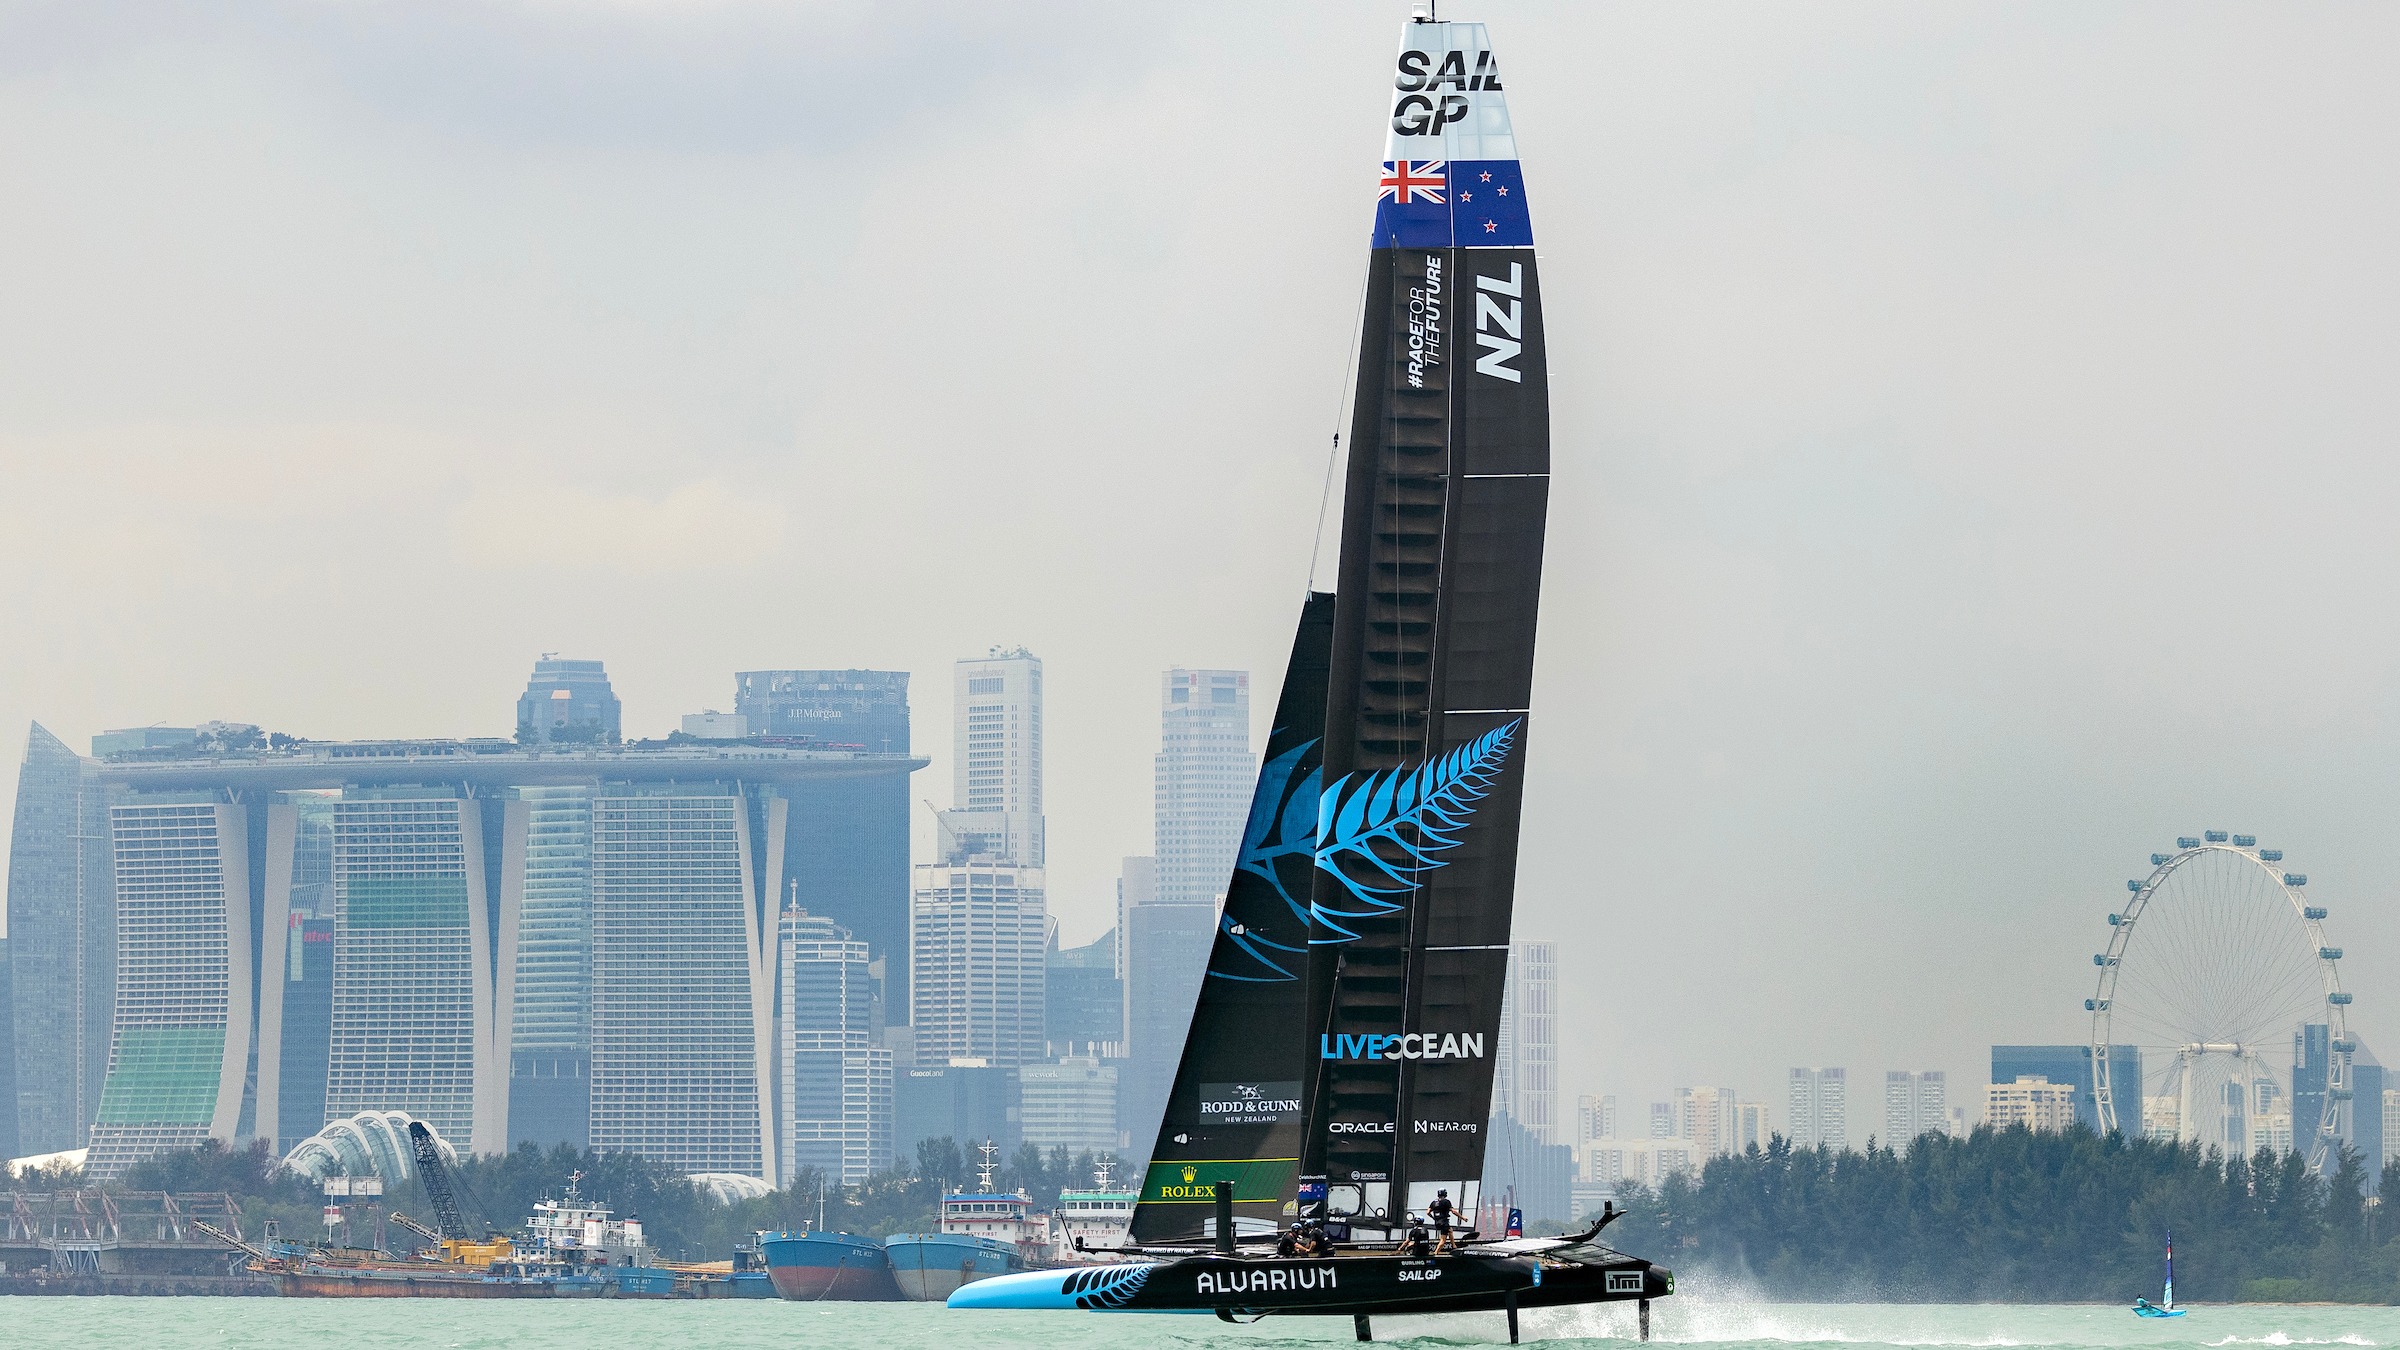 New Zealand won the Singapore Sail Grand Prix, the first ever SailGP event in Asia